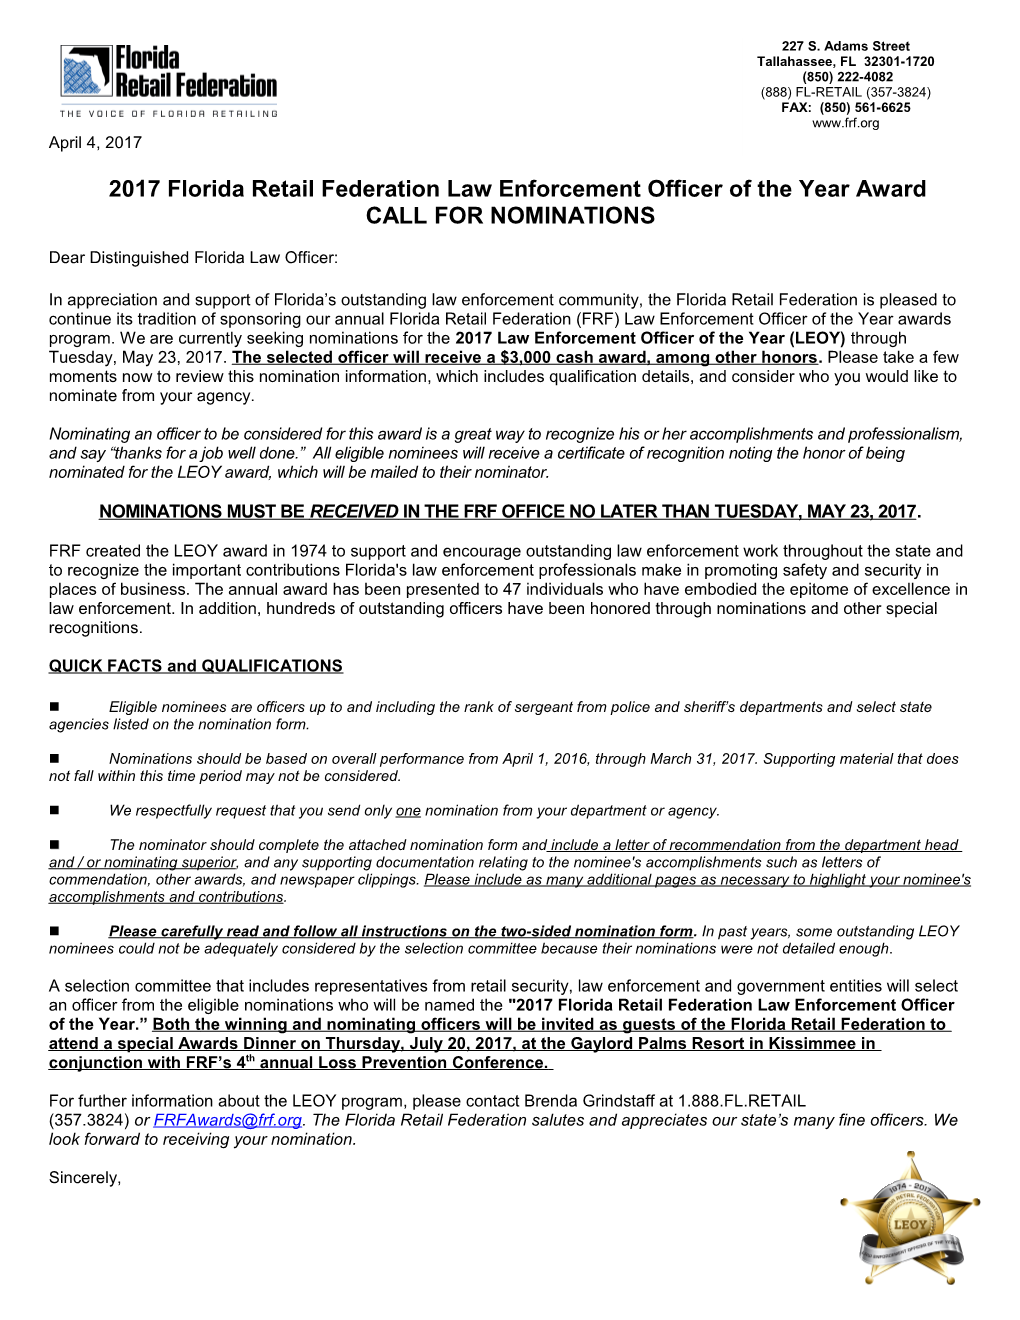 2017 Florida Retail Federation Law Enforcement Officer of the Year Award